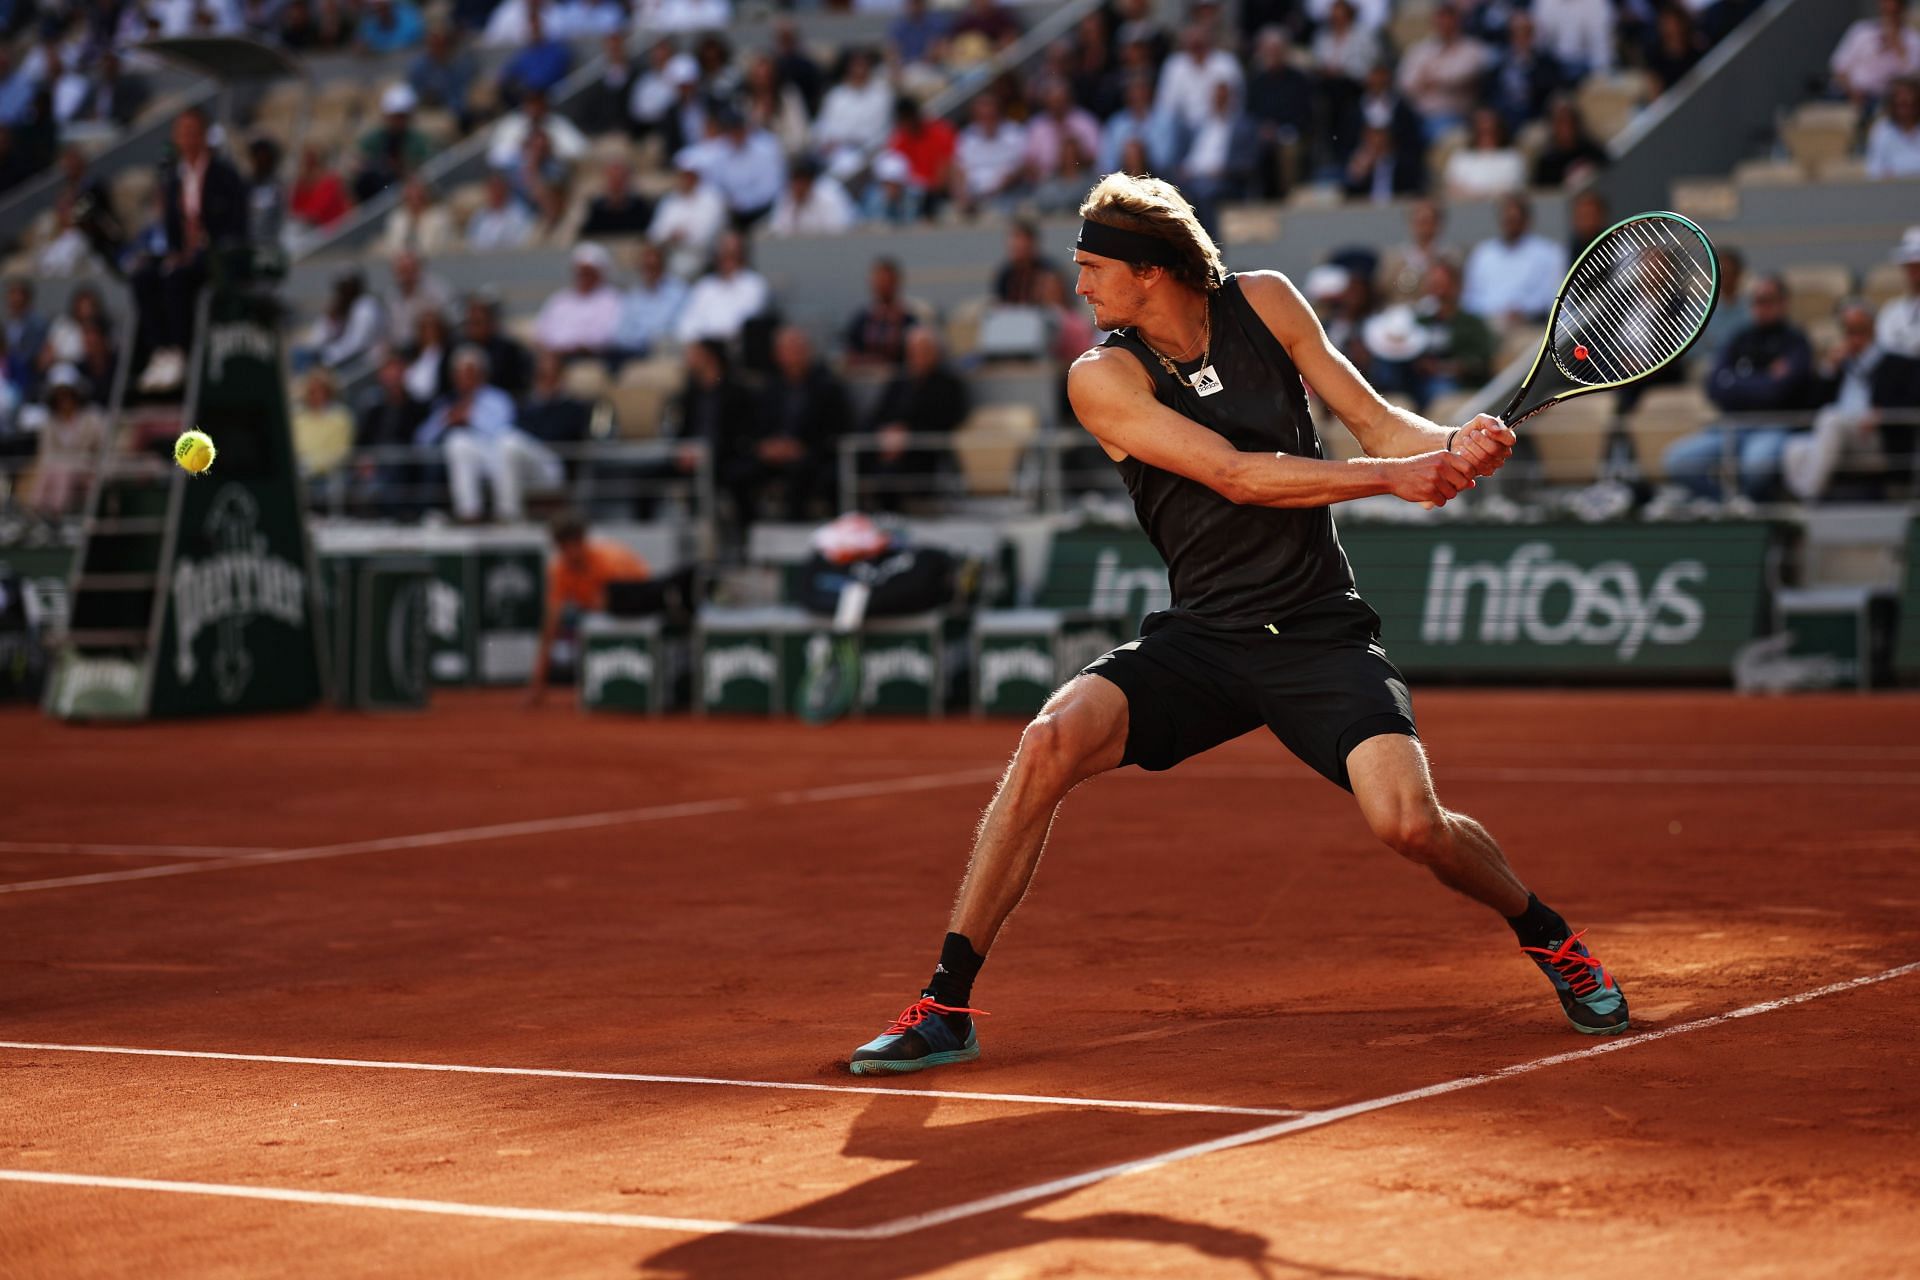 Zverev in action at the French Open quarterfinals